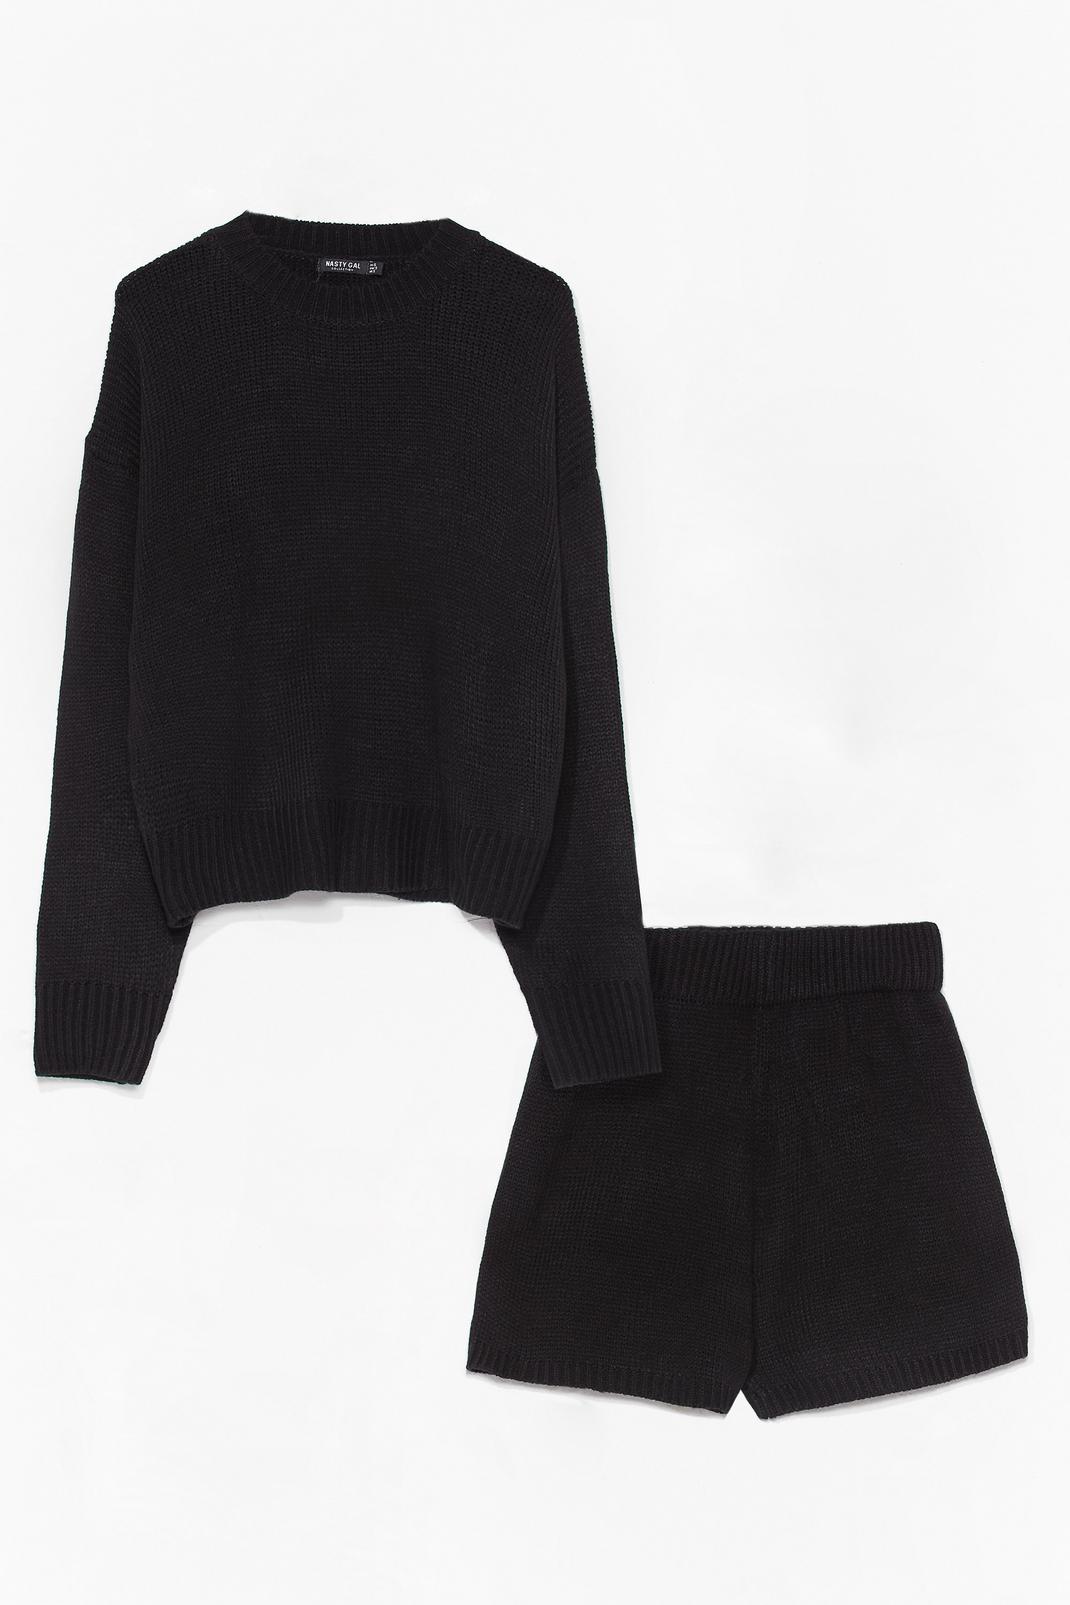 Black Luxe Like Fun Knitted Sweater and Shorts Lounge Set image number 1